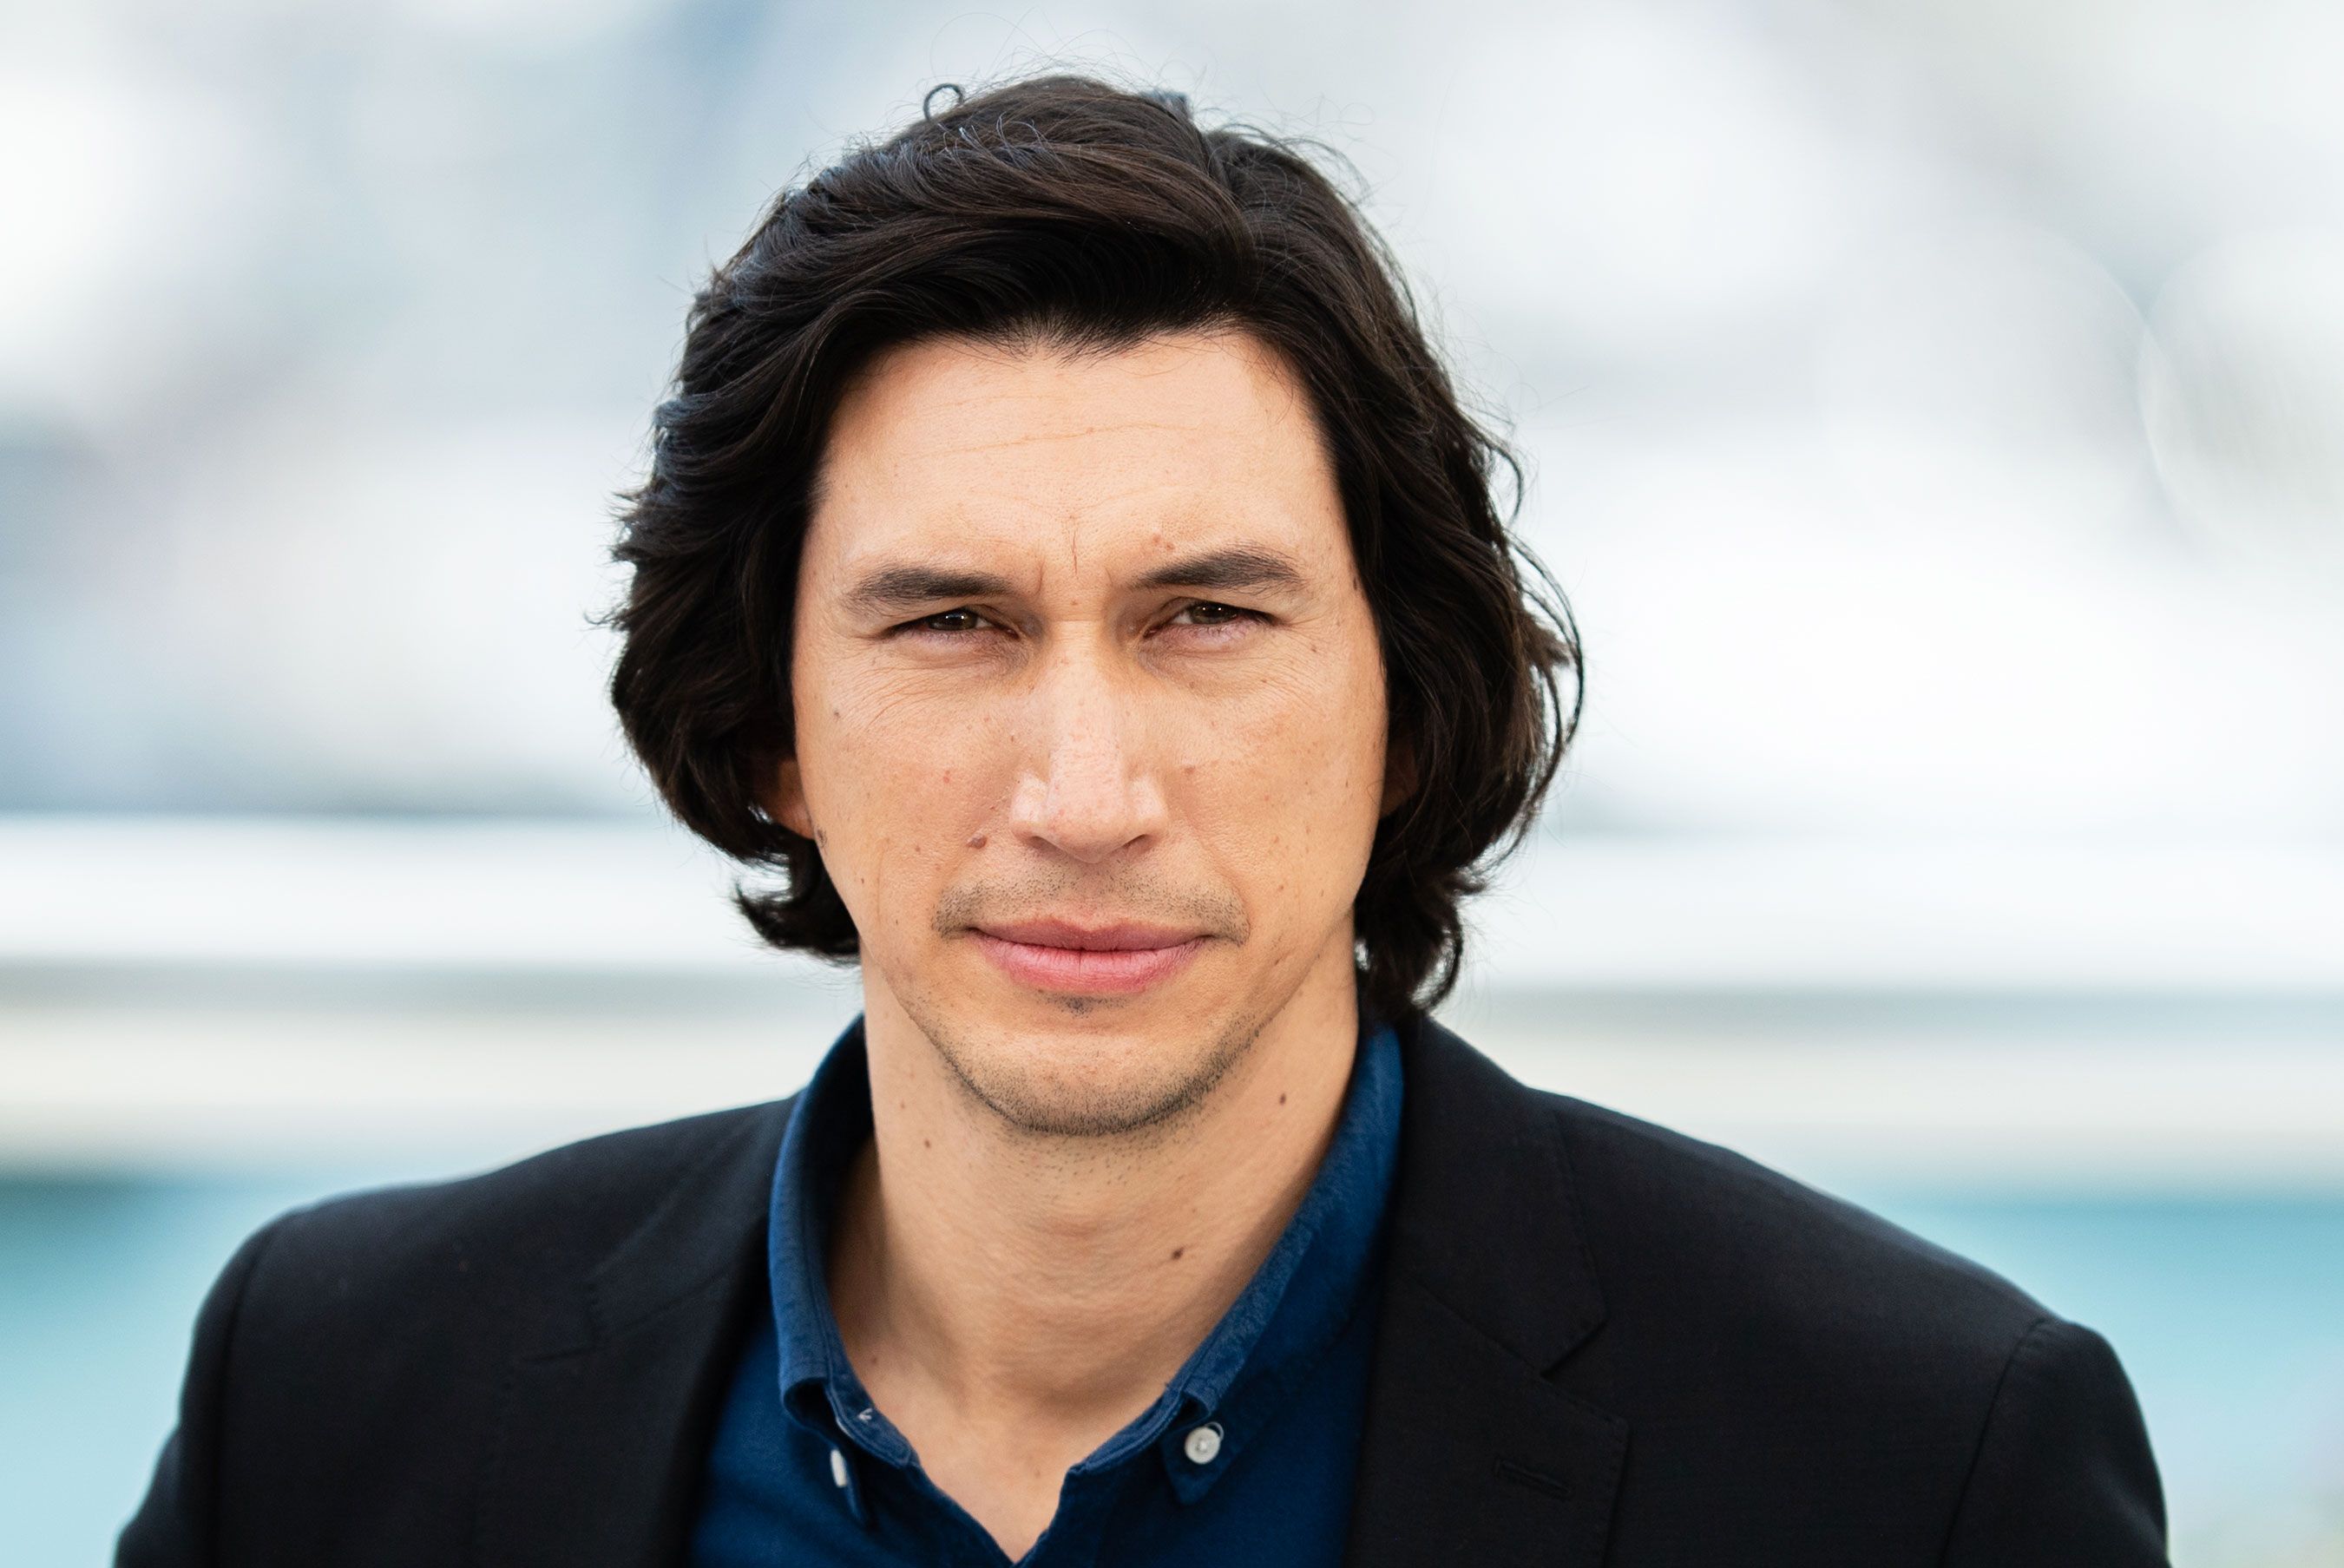 Adam Driver is the Face of Burberry's New Men's Fragrance by Riccardo Tisci